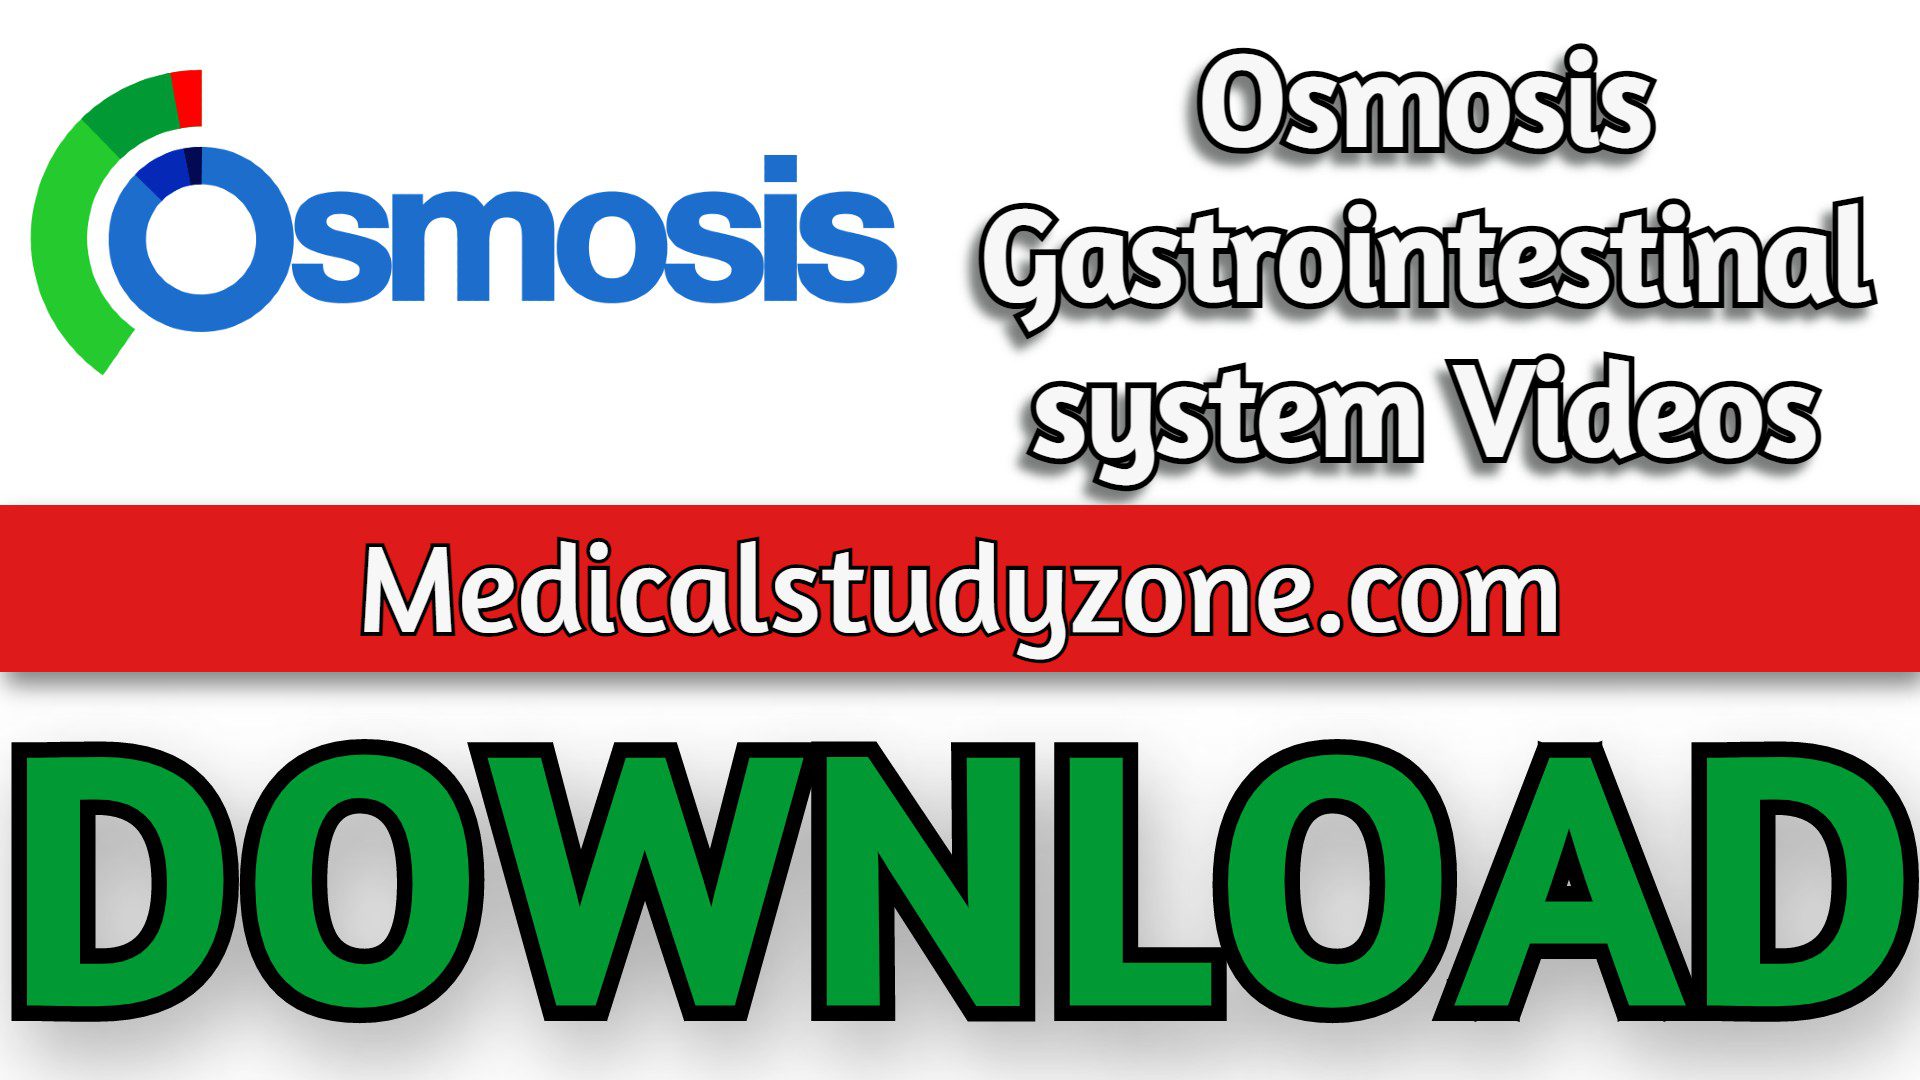 Osmosis Gastrointestinal system Videos 2022 Free Download